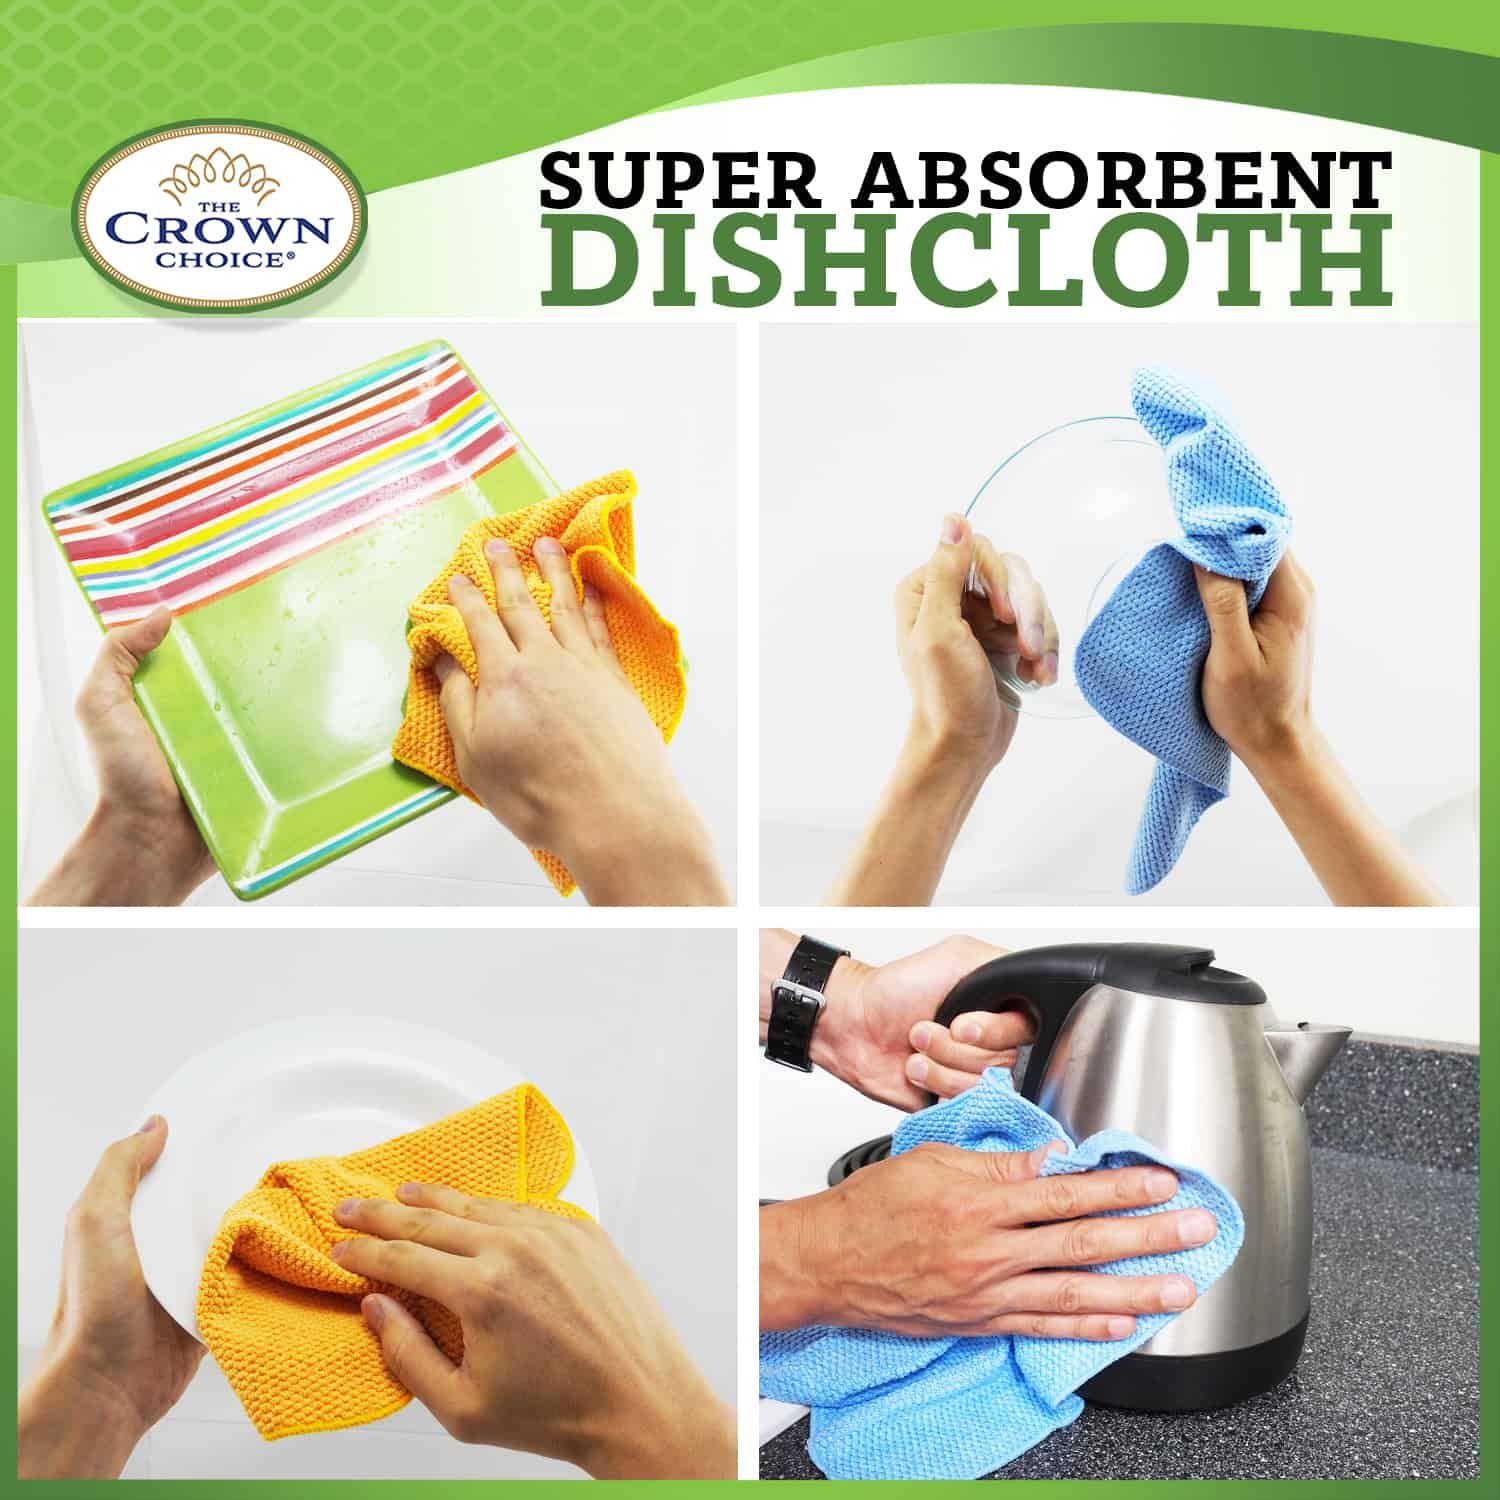 VerPetridure Microfiber Cleaning Cloth, Black Cleaning Towels, Lint Free  Dishwashing Towel, Softer Ultra Absorbent Cleaning Rags for Furniture  Kitchen Window Car 